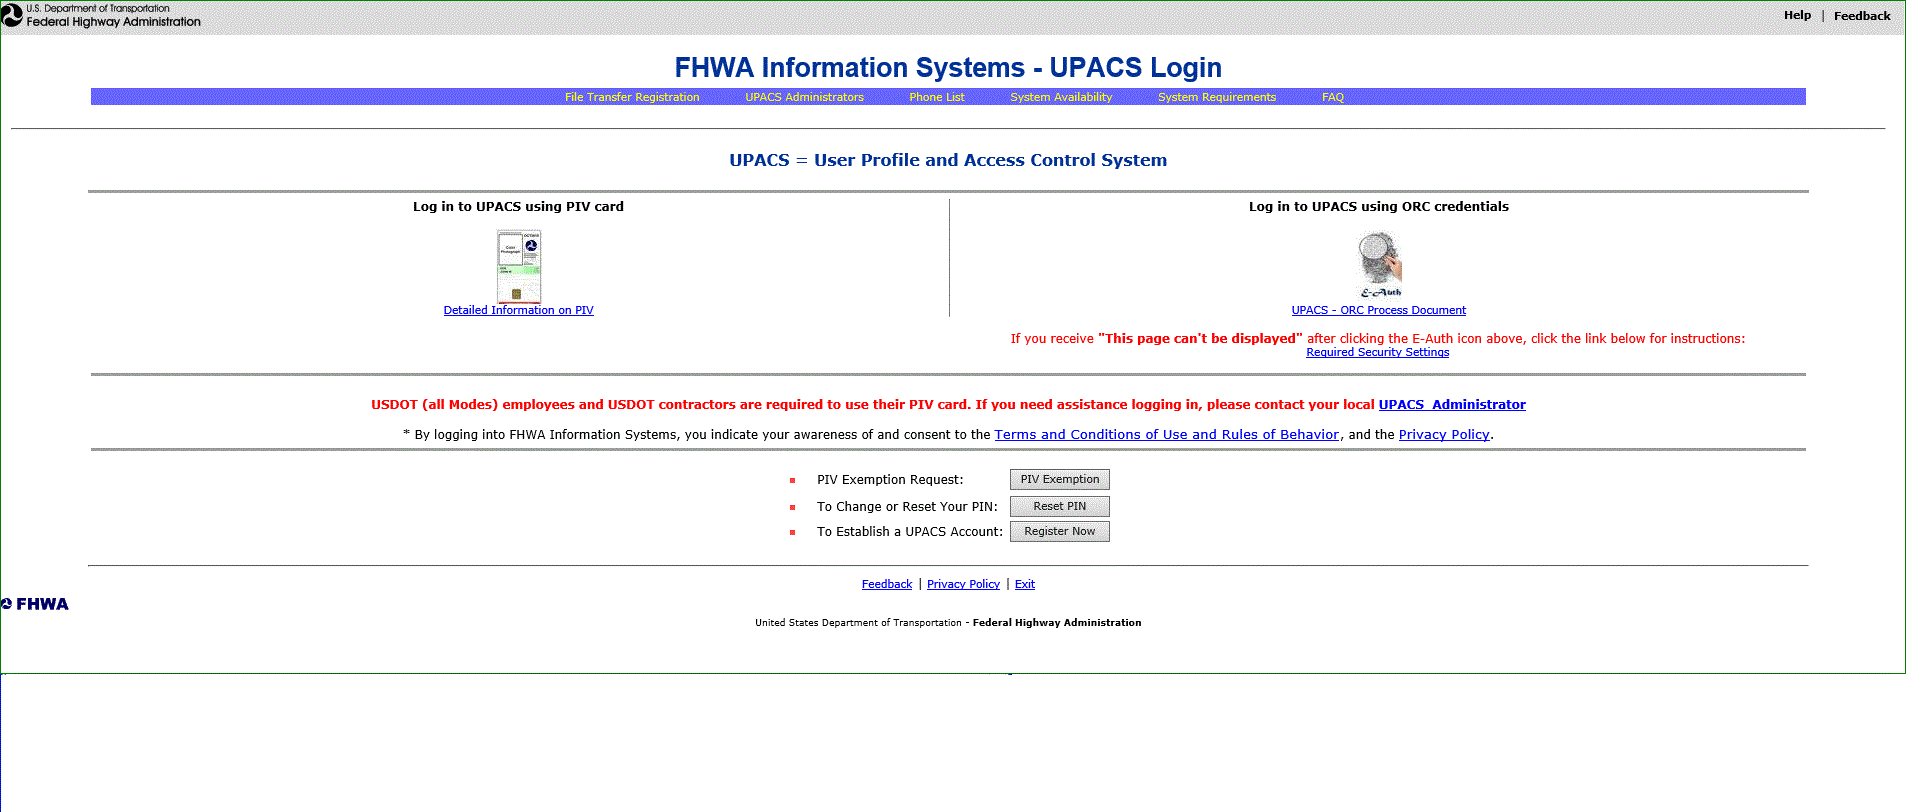 FHWA Information Systems - UPACS Login Page